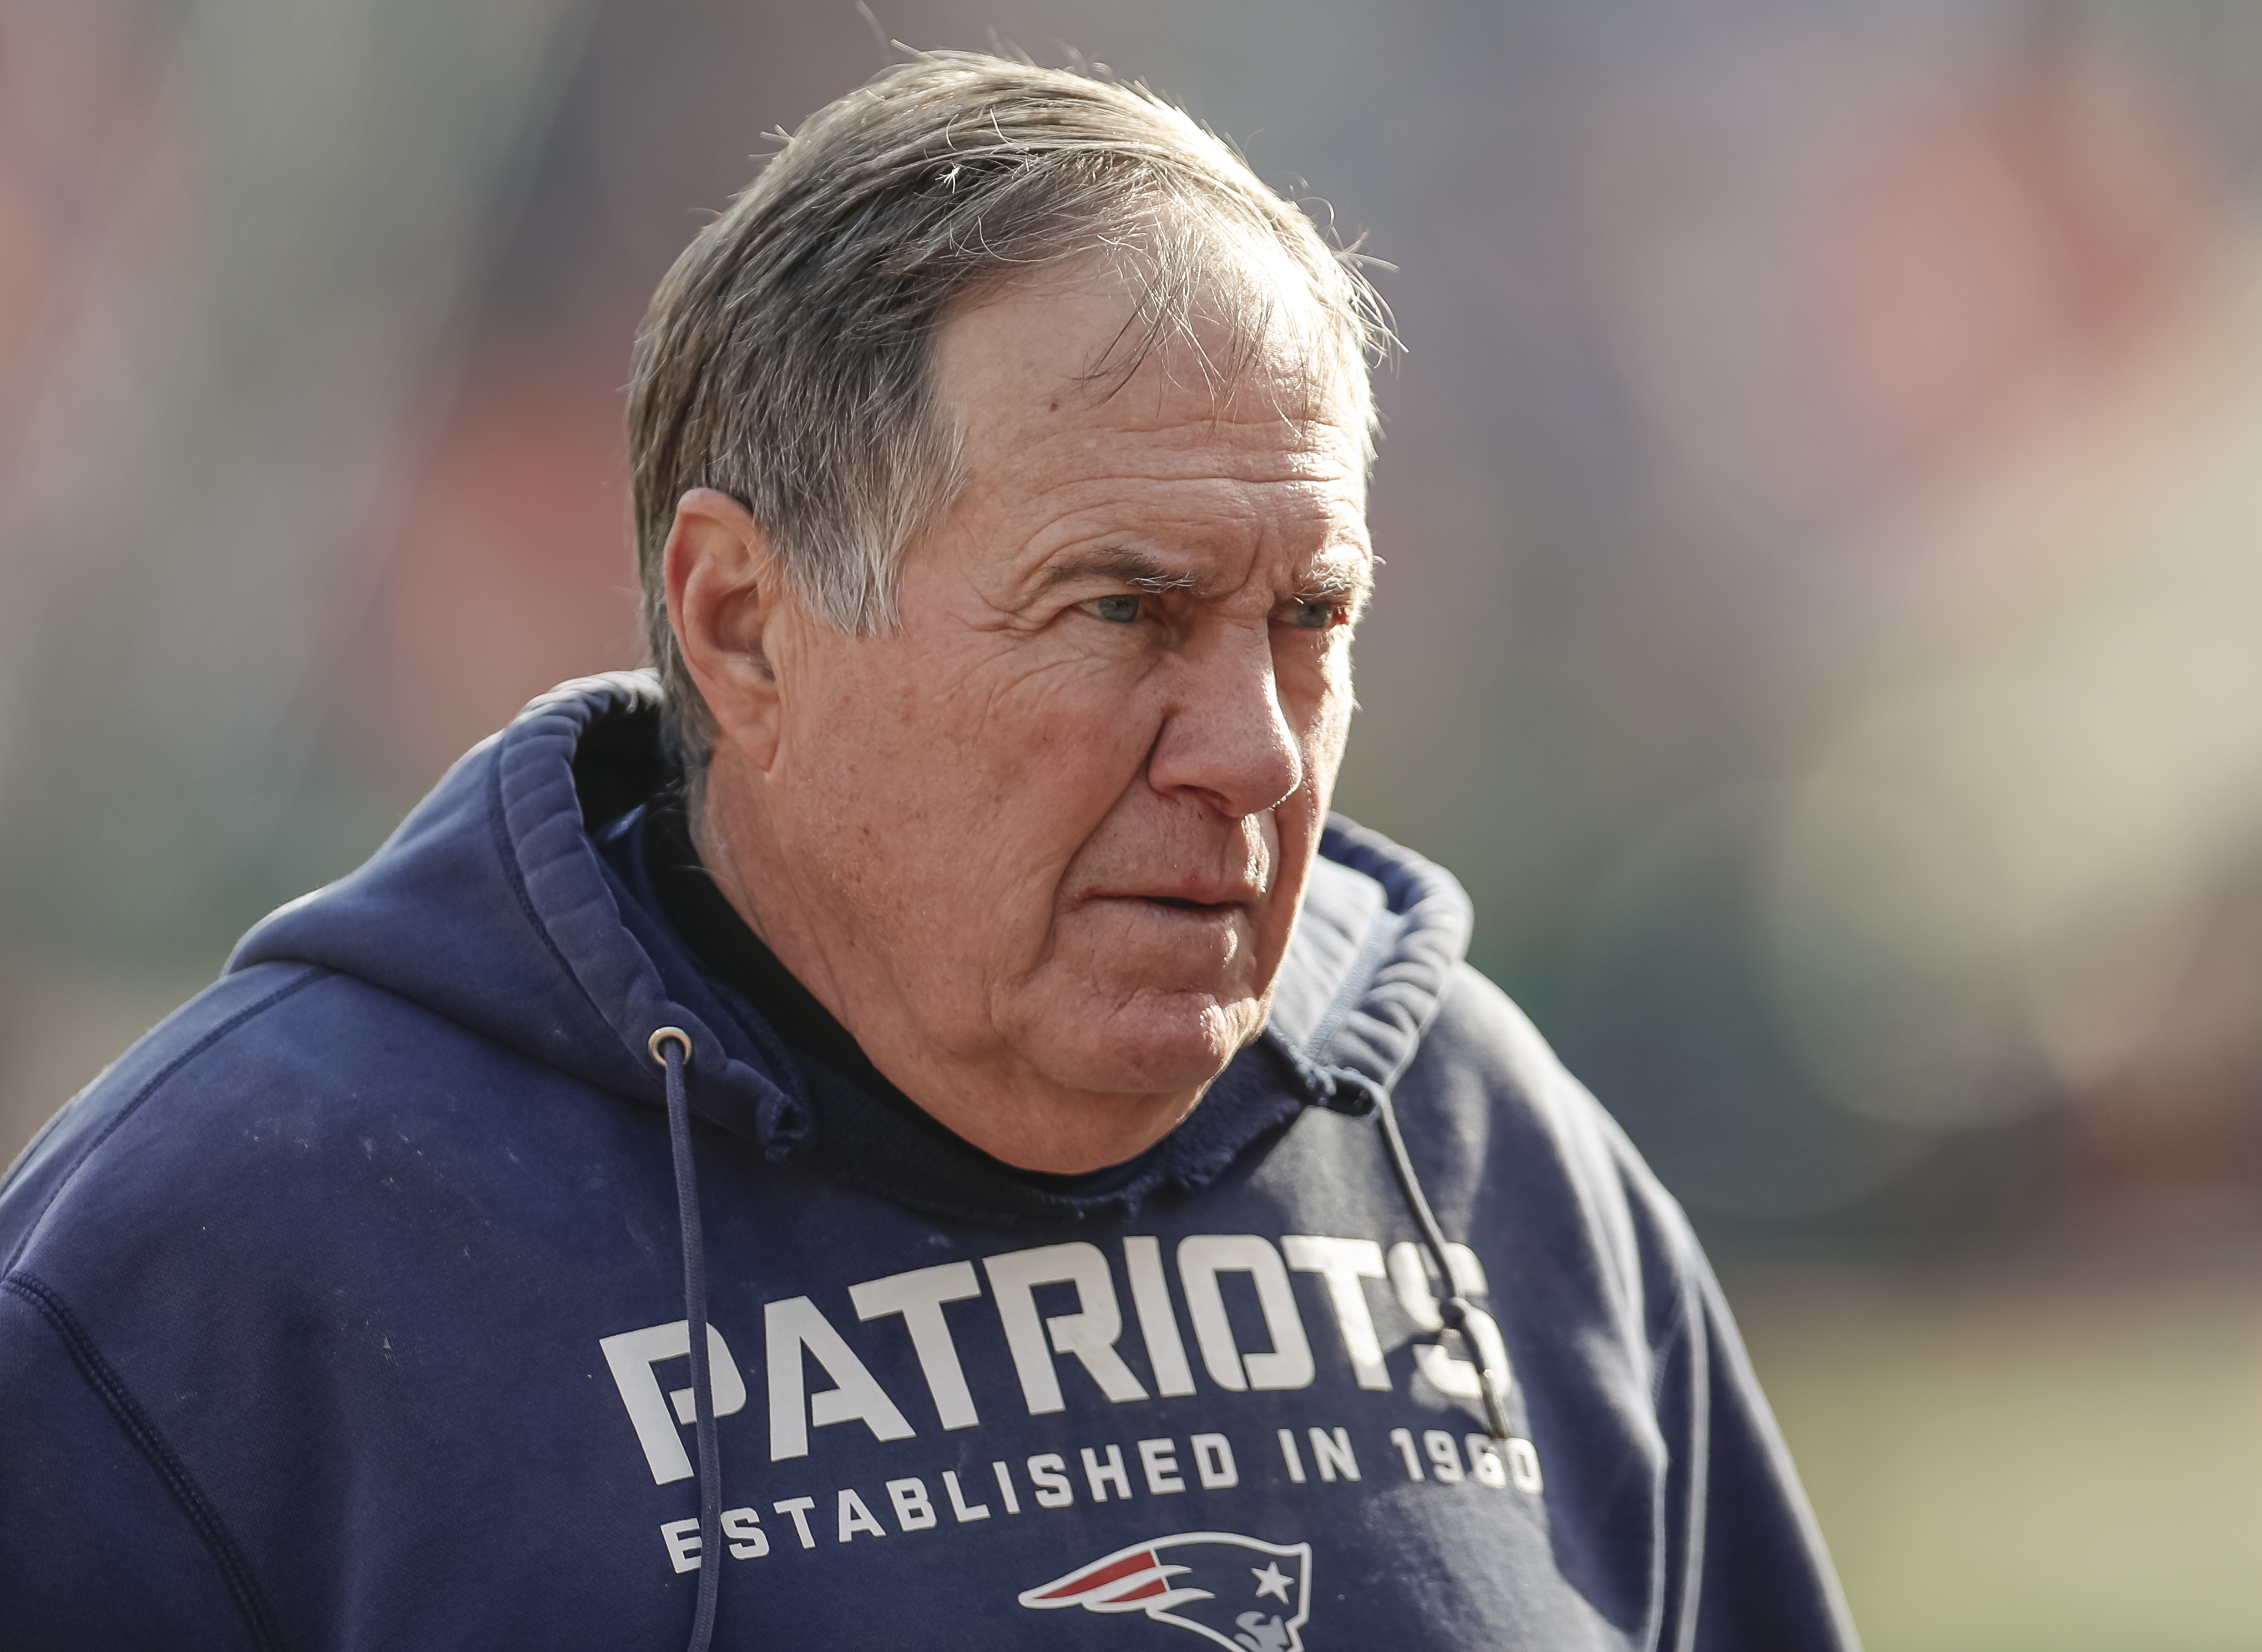 Bill Belichick Comes Through With His Most Hilarious Outfit Yet